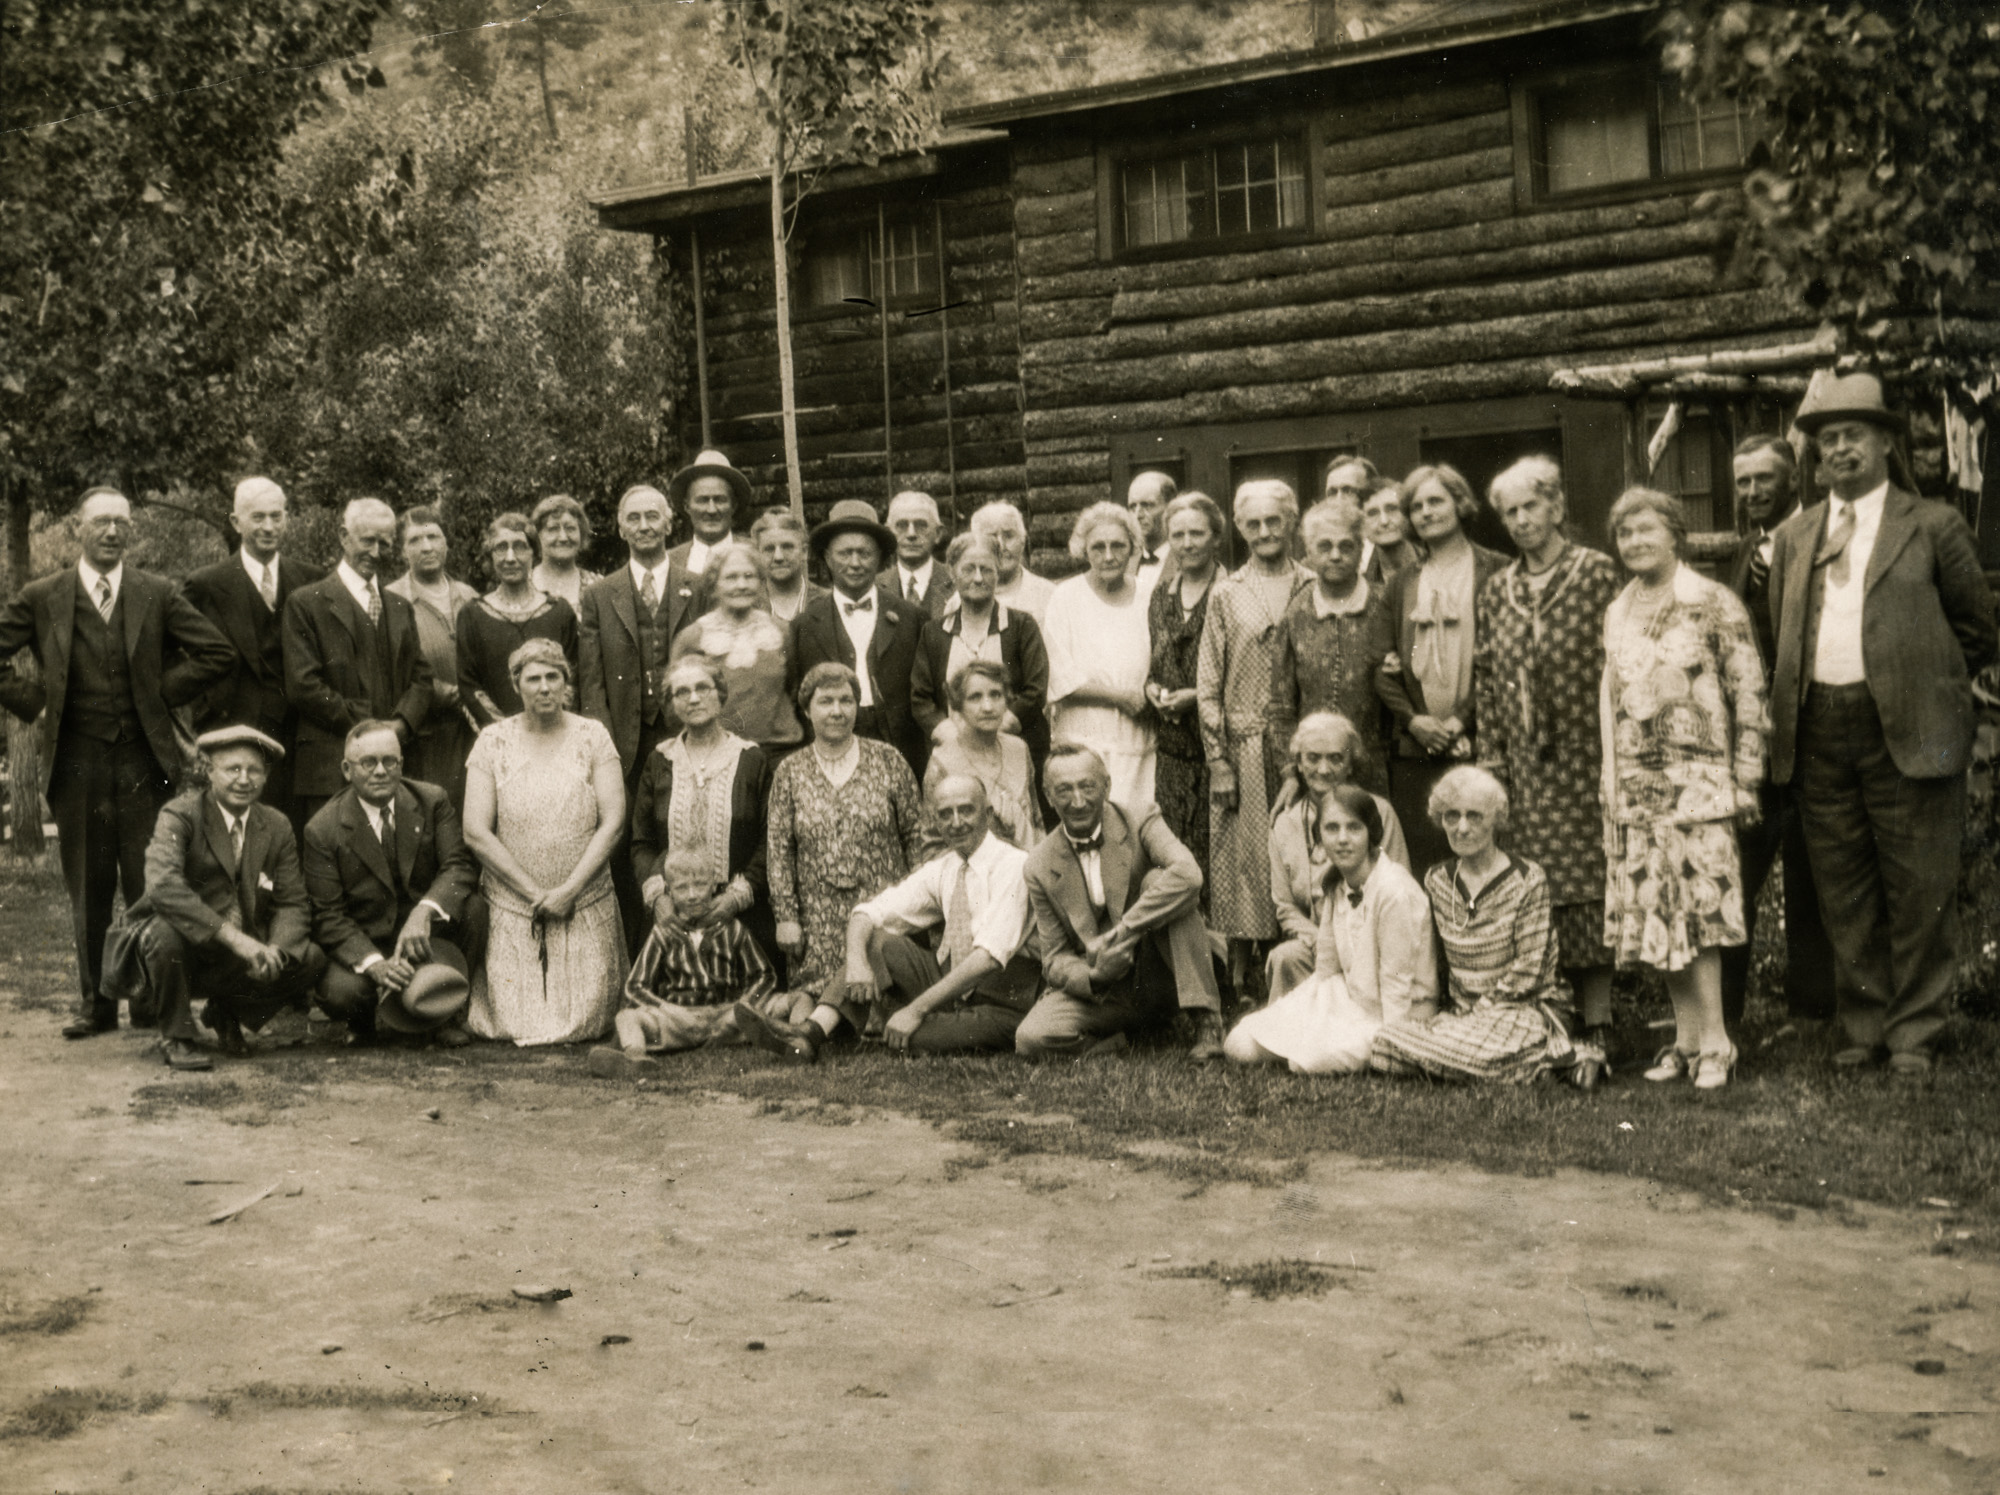 Dauth Family Archive - George Dauth with the Kensington Club at Idlewild Lodge